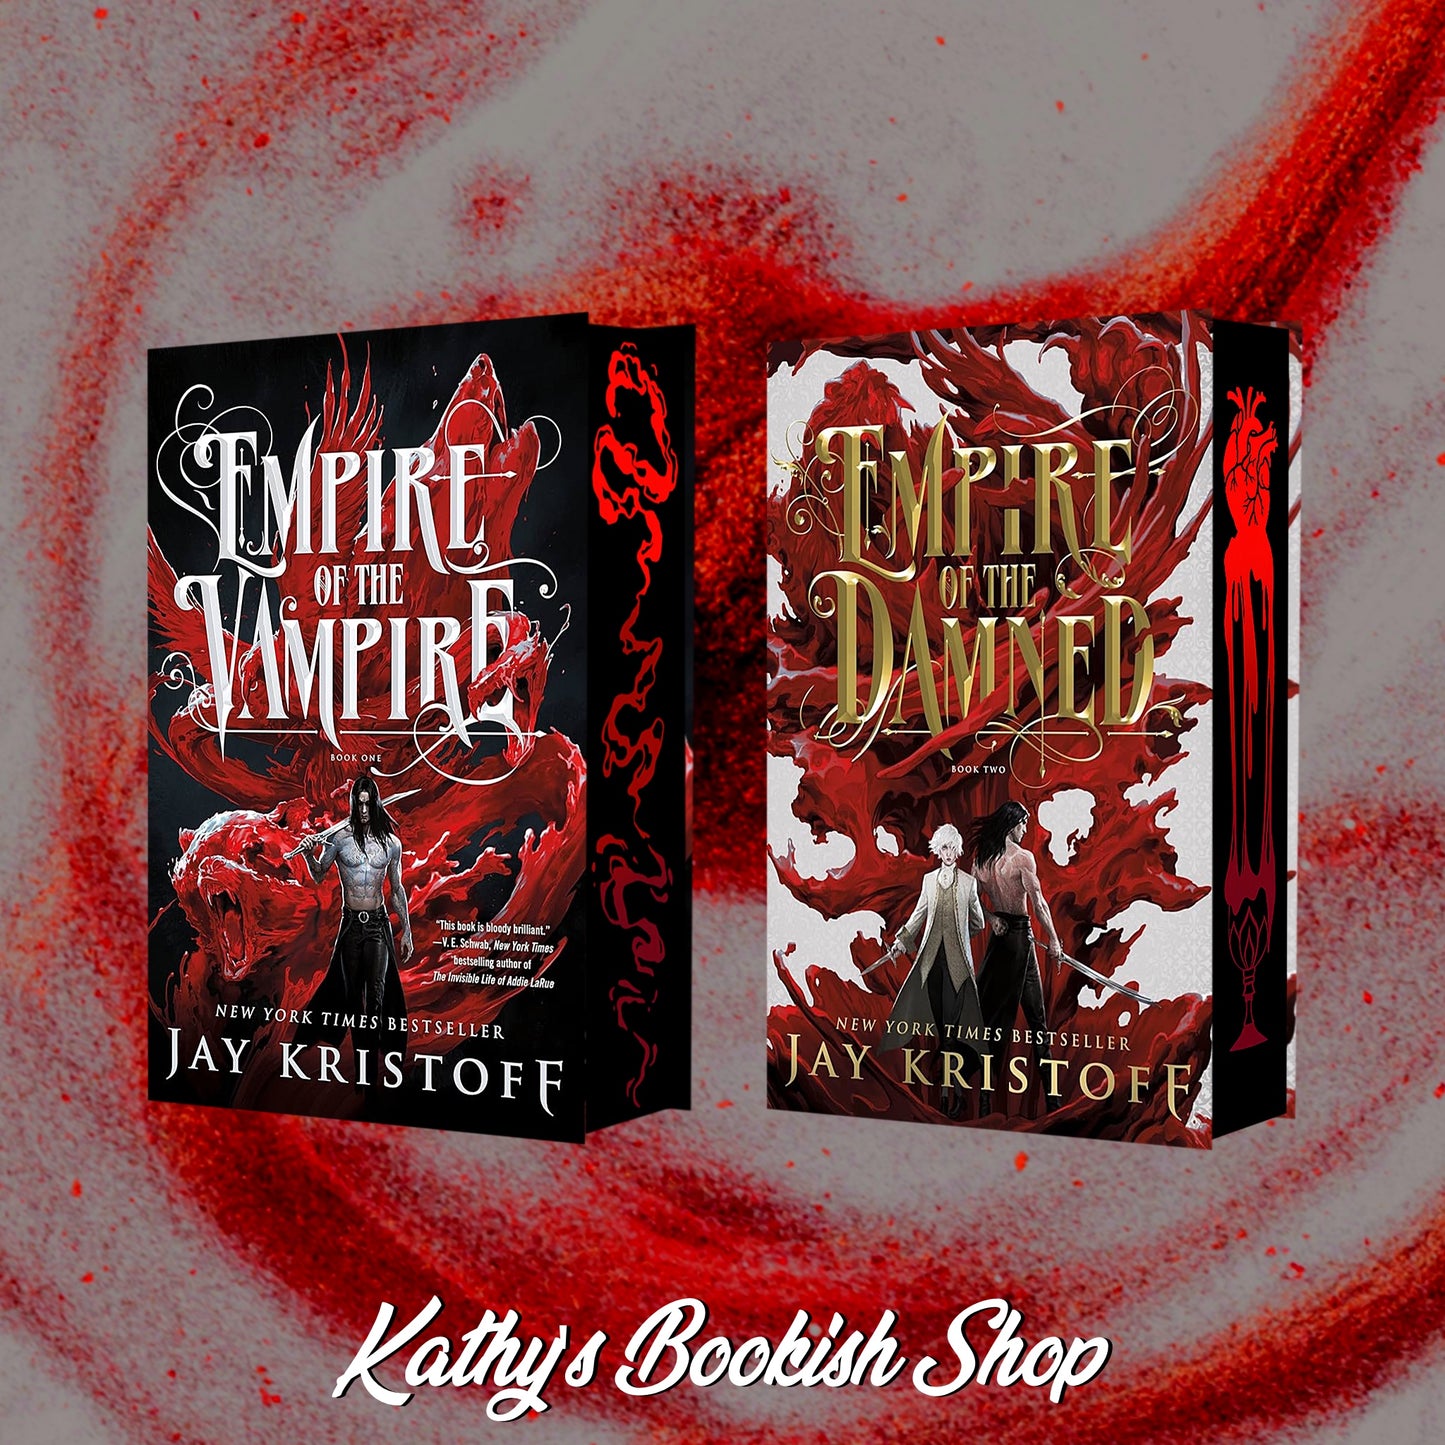 Empire of the Vampire/ Empire of the Damned